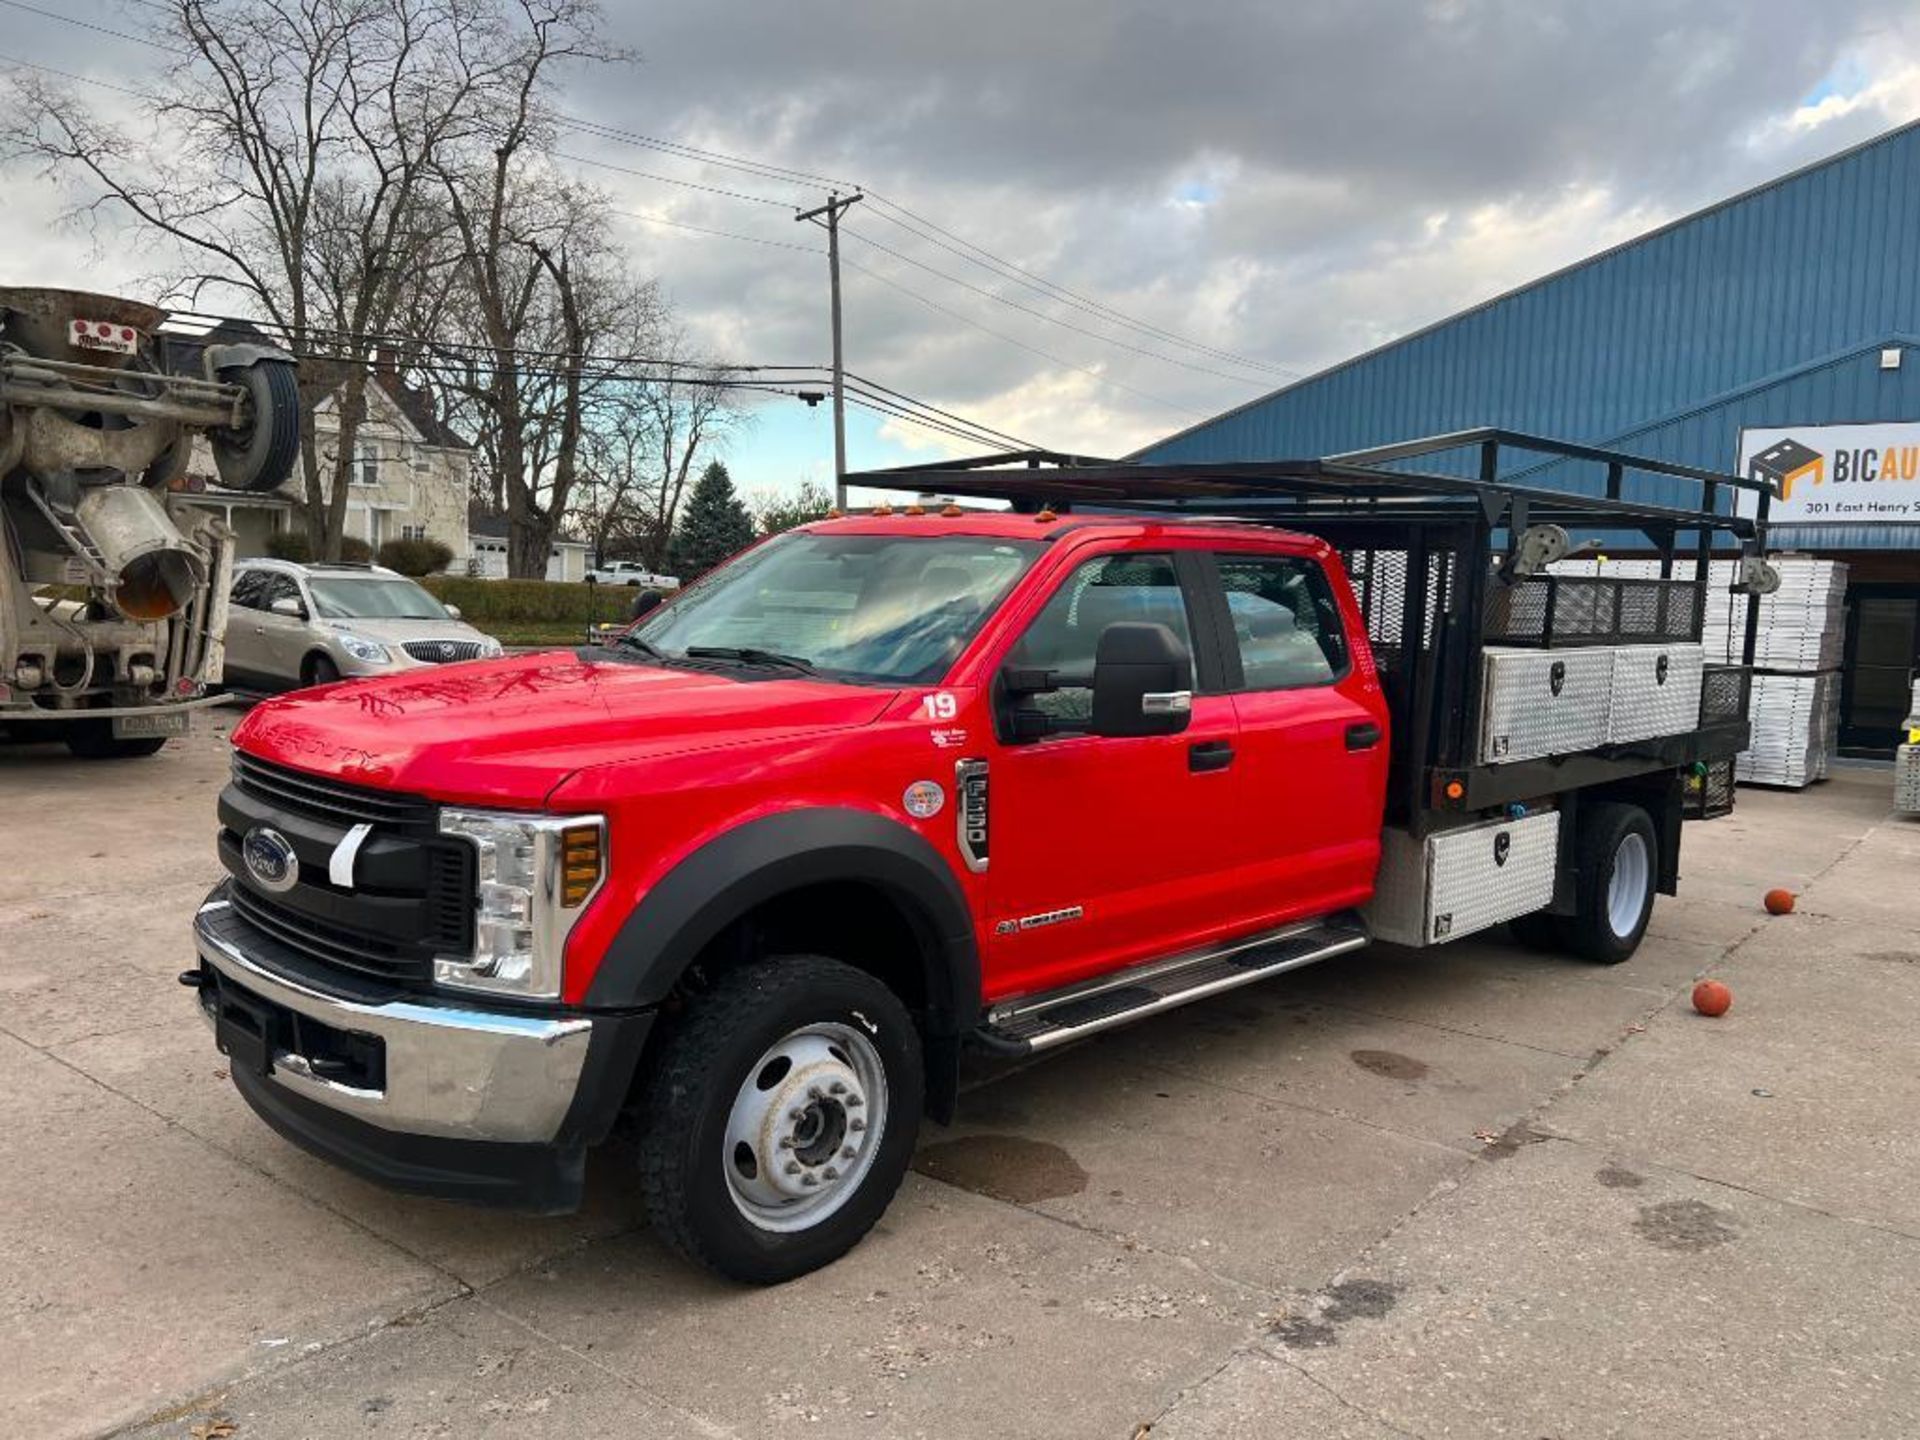 2019 Ford F550 4X4 Crew Cab Truck, VIN #1FD0W5HT1KEE51904, Miles 111,556, 6-Speed Automatic Transmis - Image 3 of 29